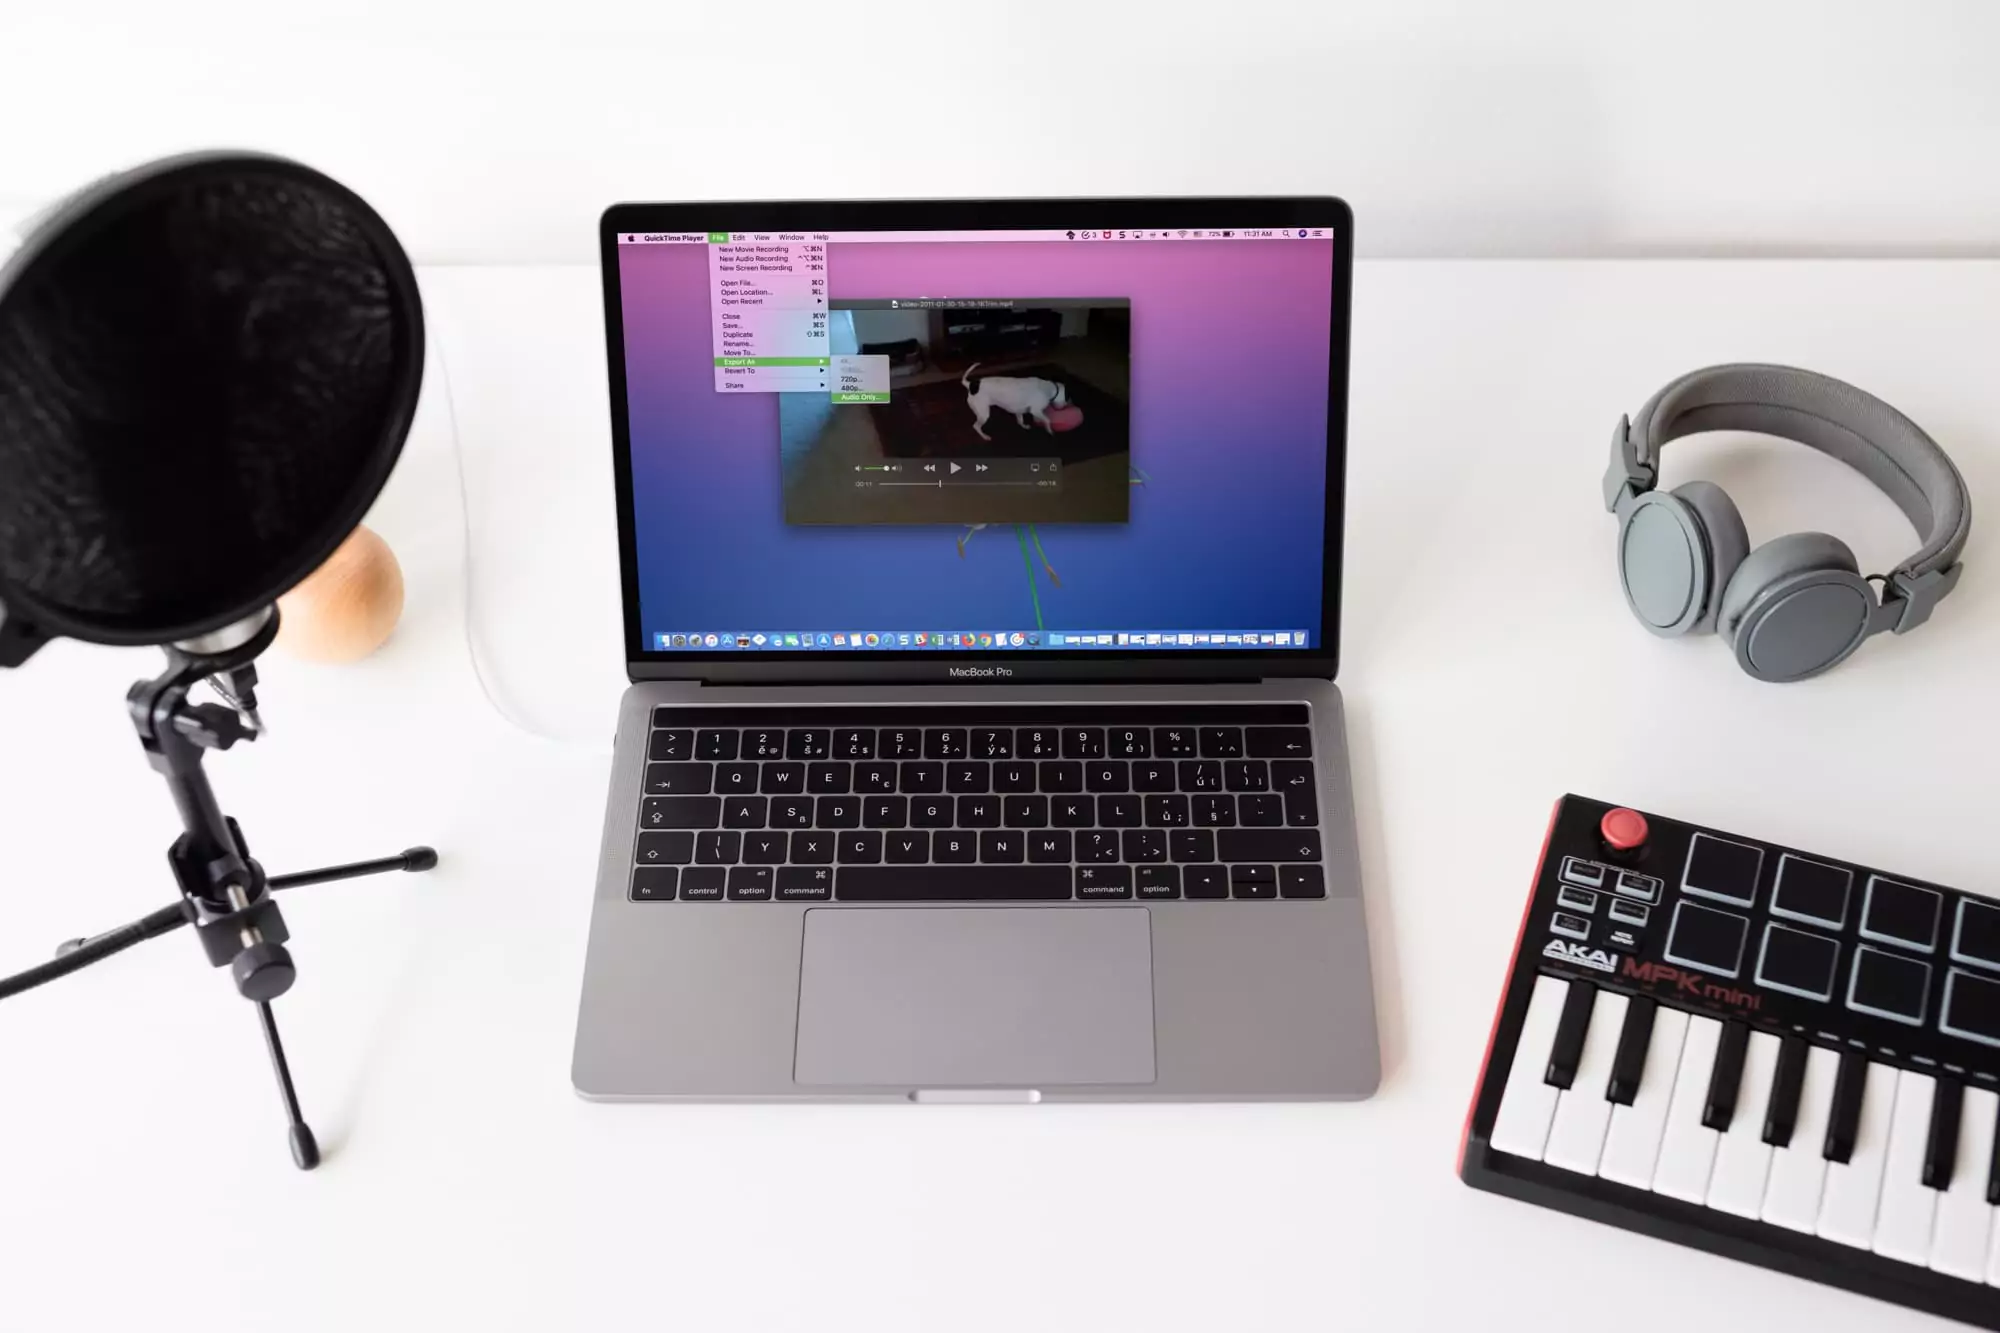 How to Extract Audio from Video on Mac: A Step-by-Step Guide